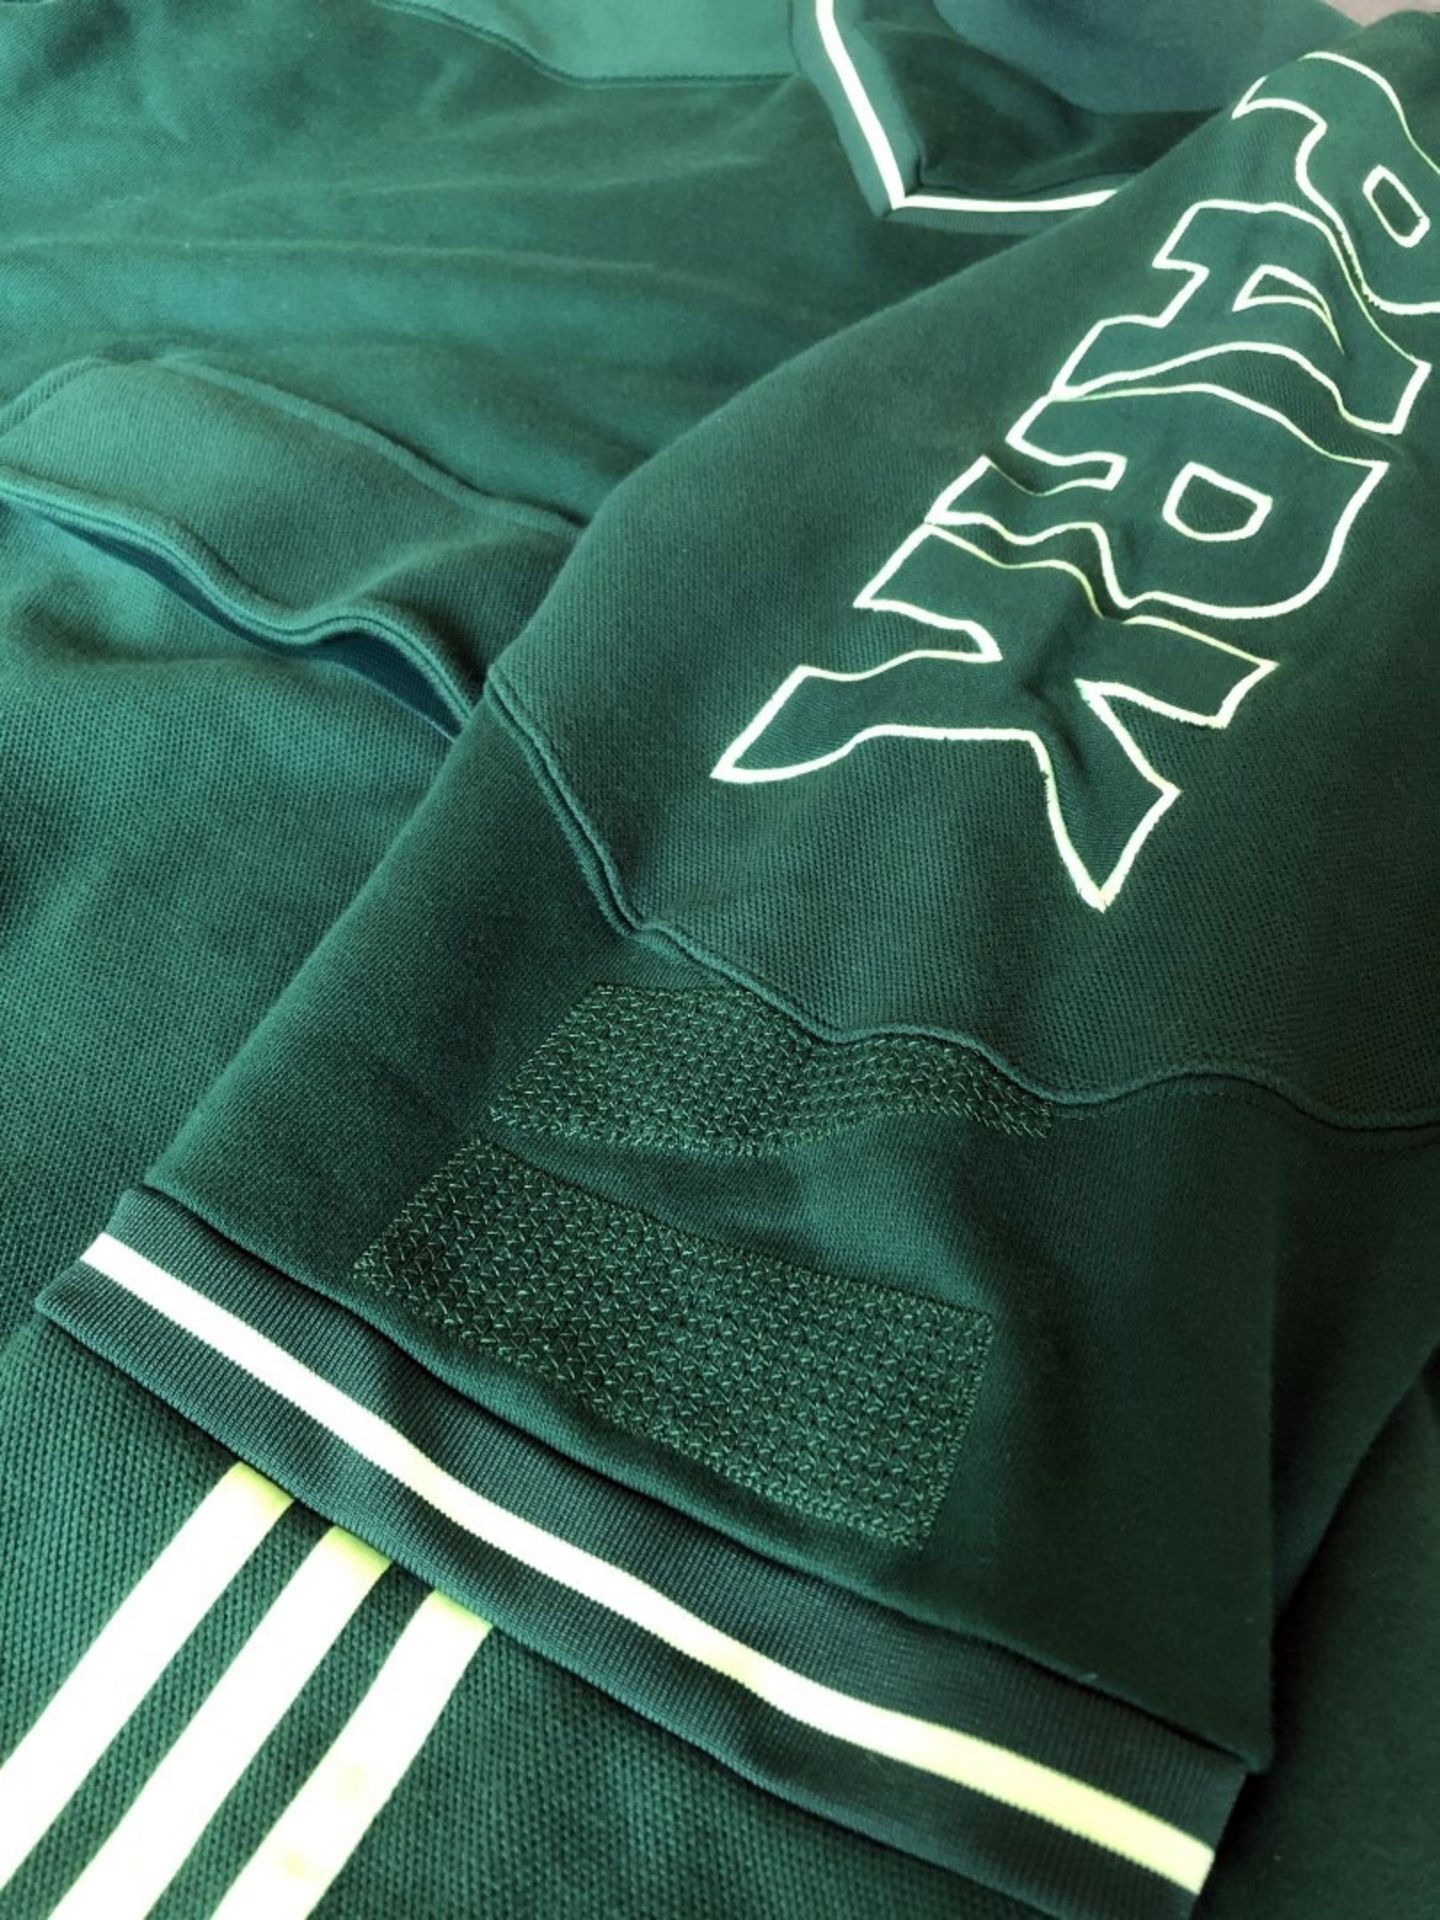 1 x Men's Genuine Adidas Ivy Park Tracksuit In Cargo Dark Green - Size (EU/UK): L/L - Preowned - - Image 6 of 14